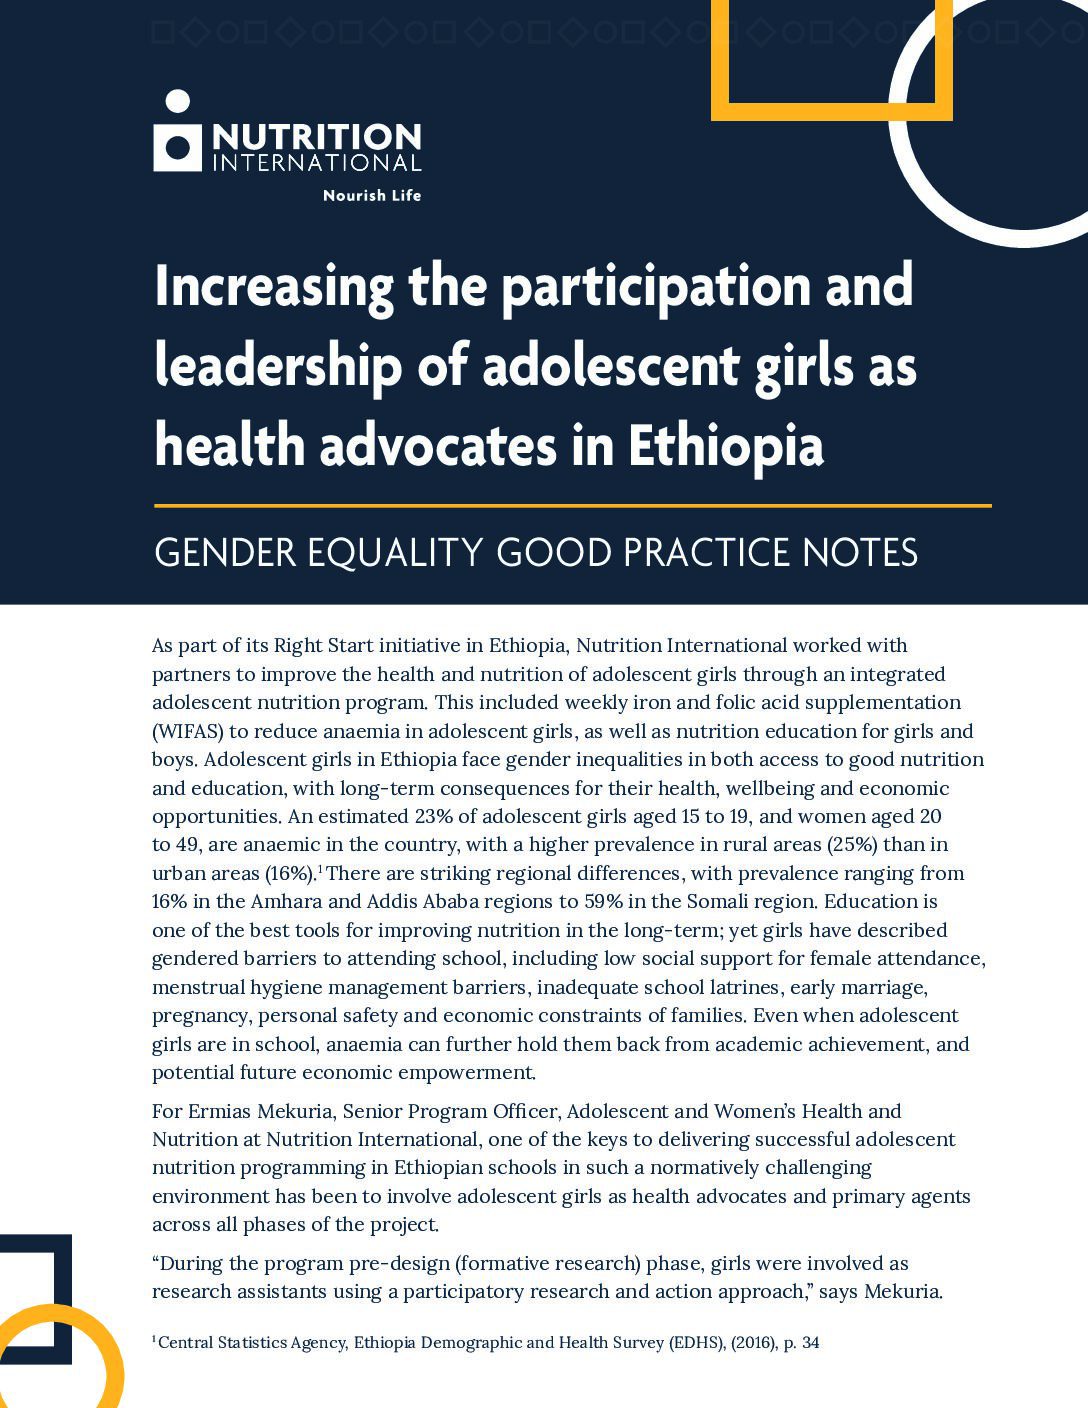 Increasing the participation and leadership of adolescent girls as health advocates in Ethiopia thumbnail